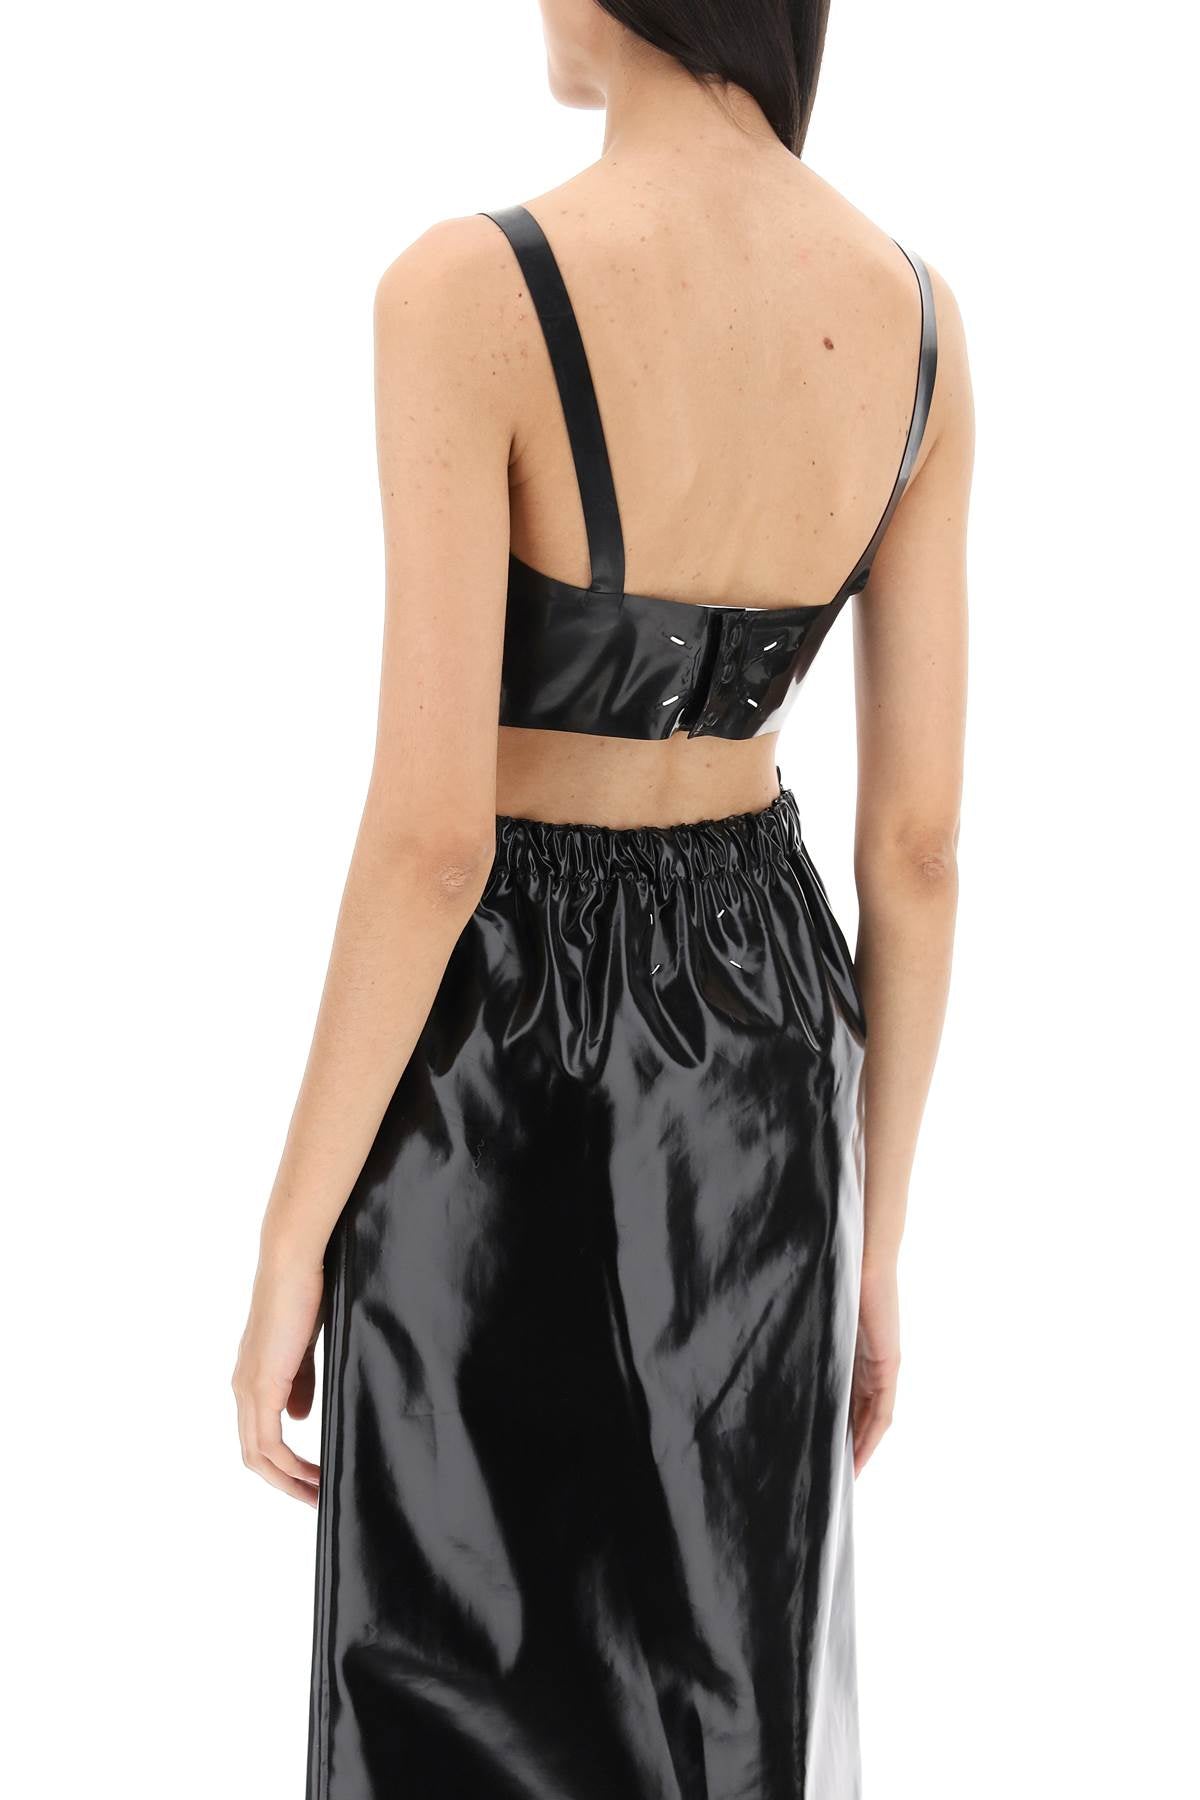 Maison margiela latex top with bullet cups-2